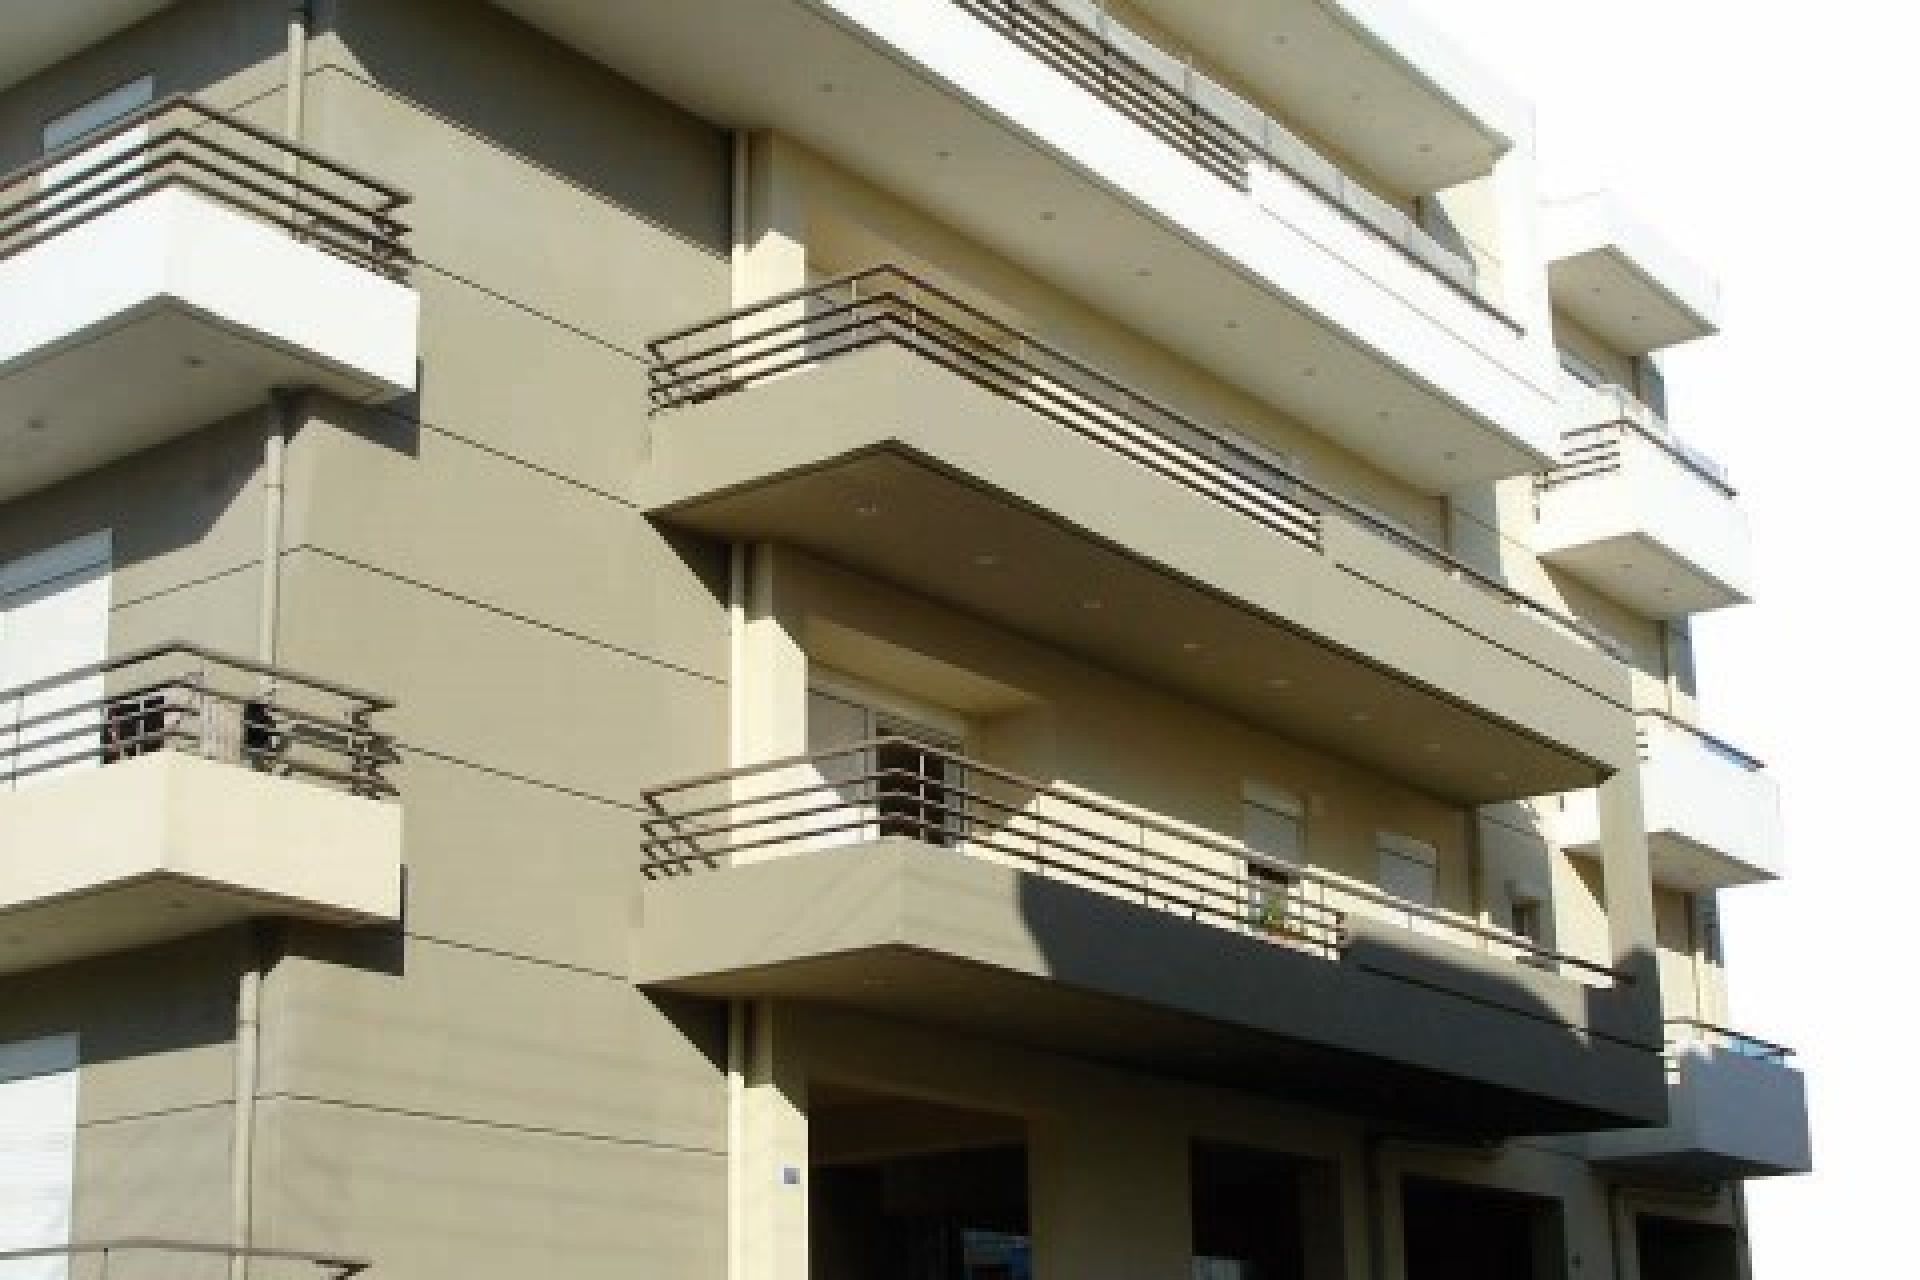 Four-storey residential complex with pilotis section & basement